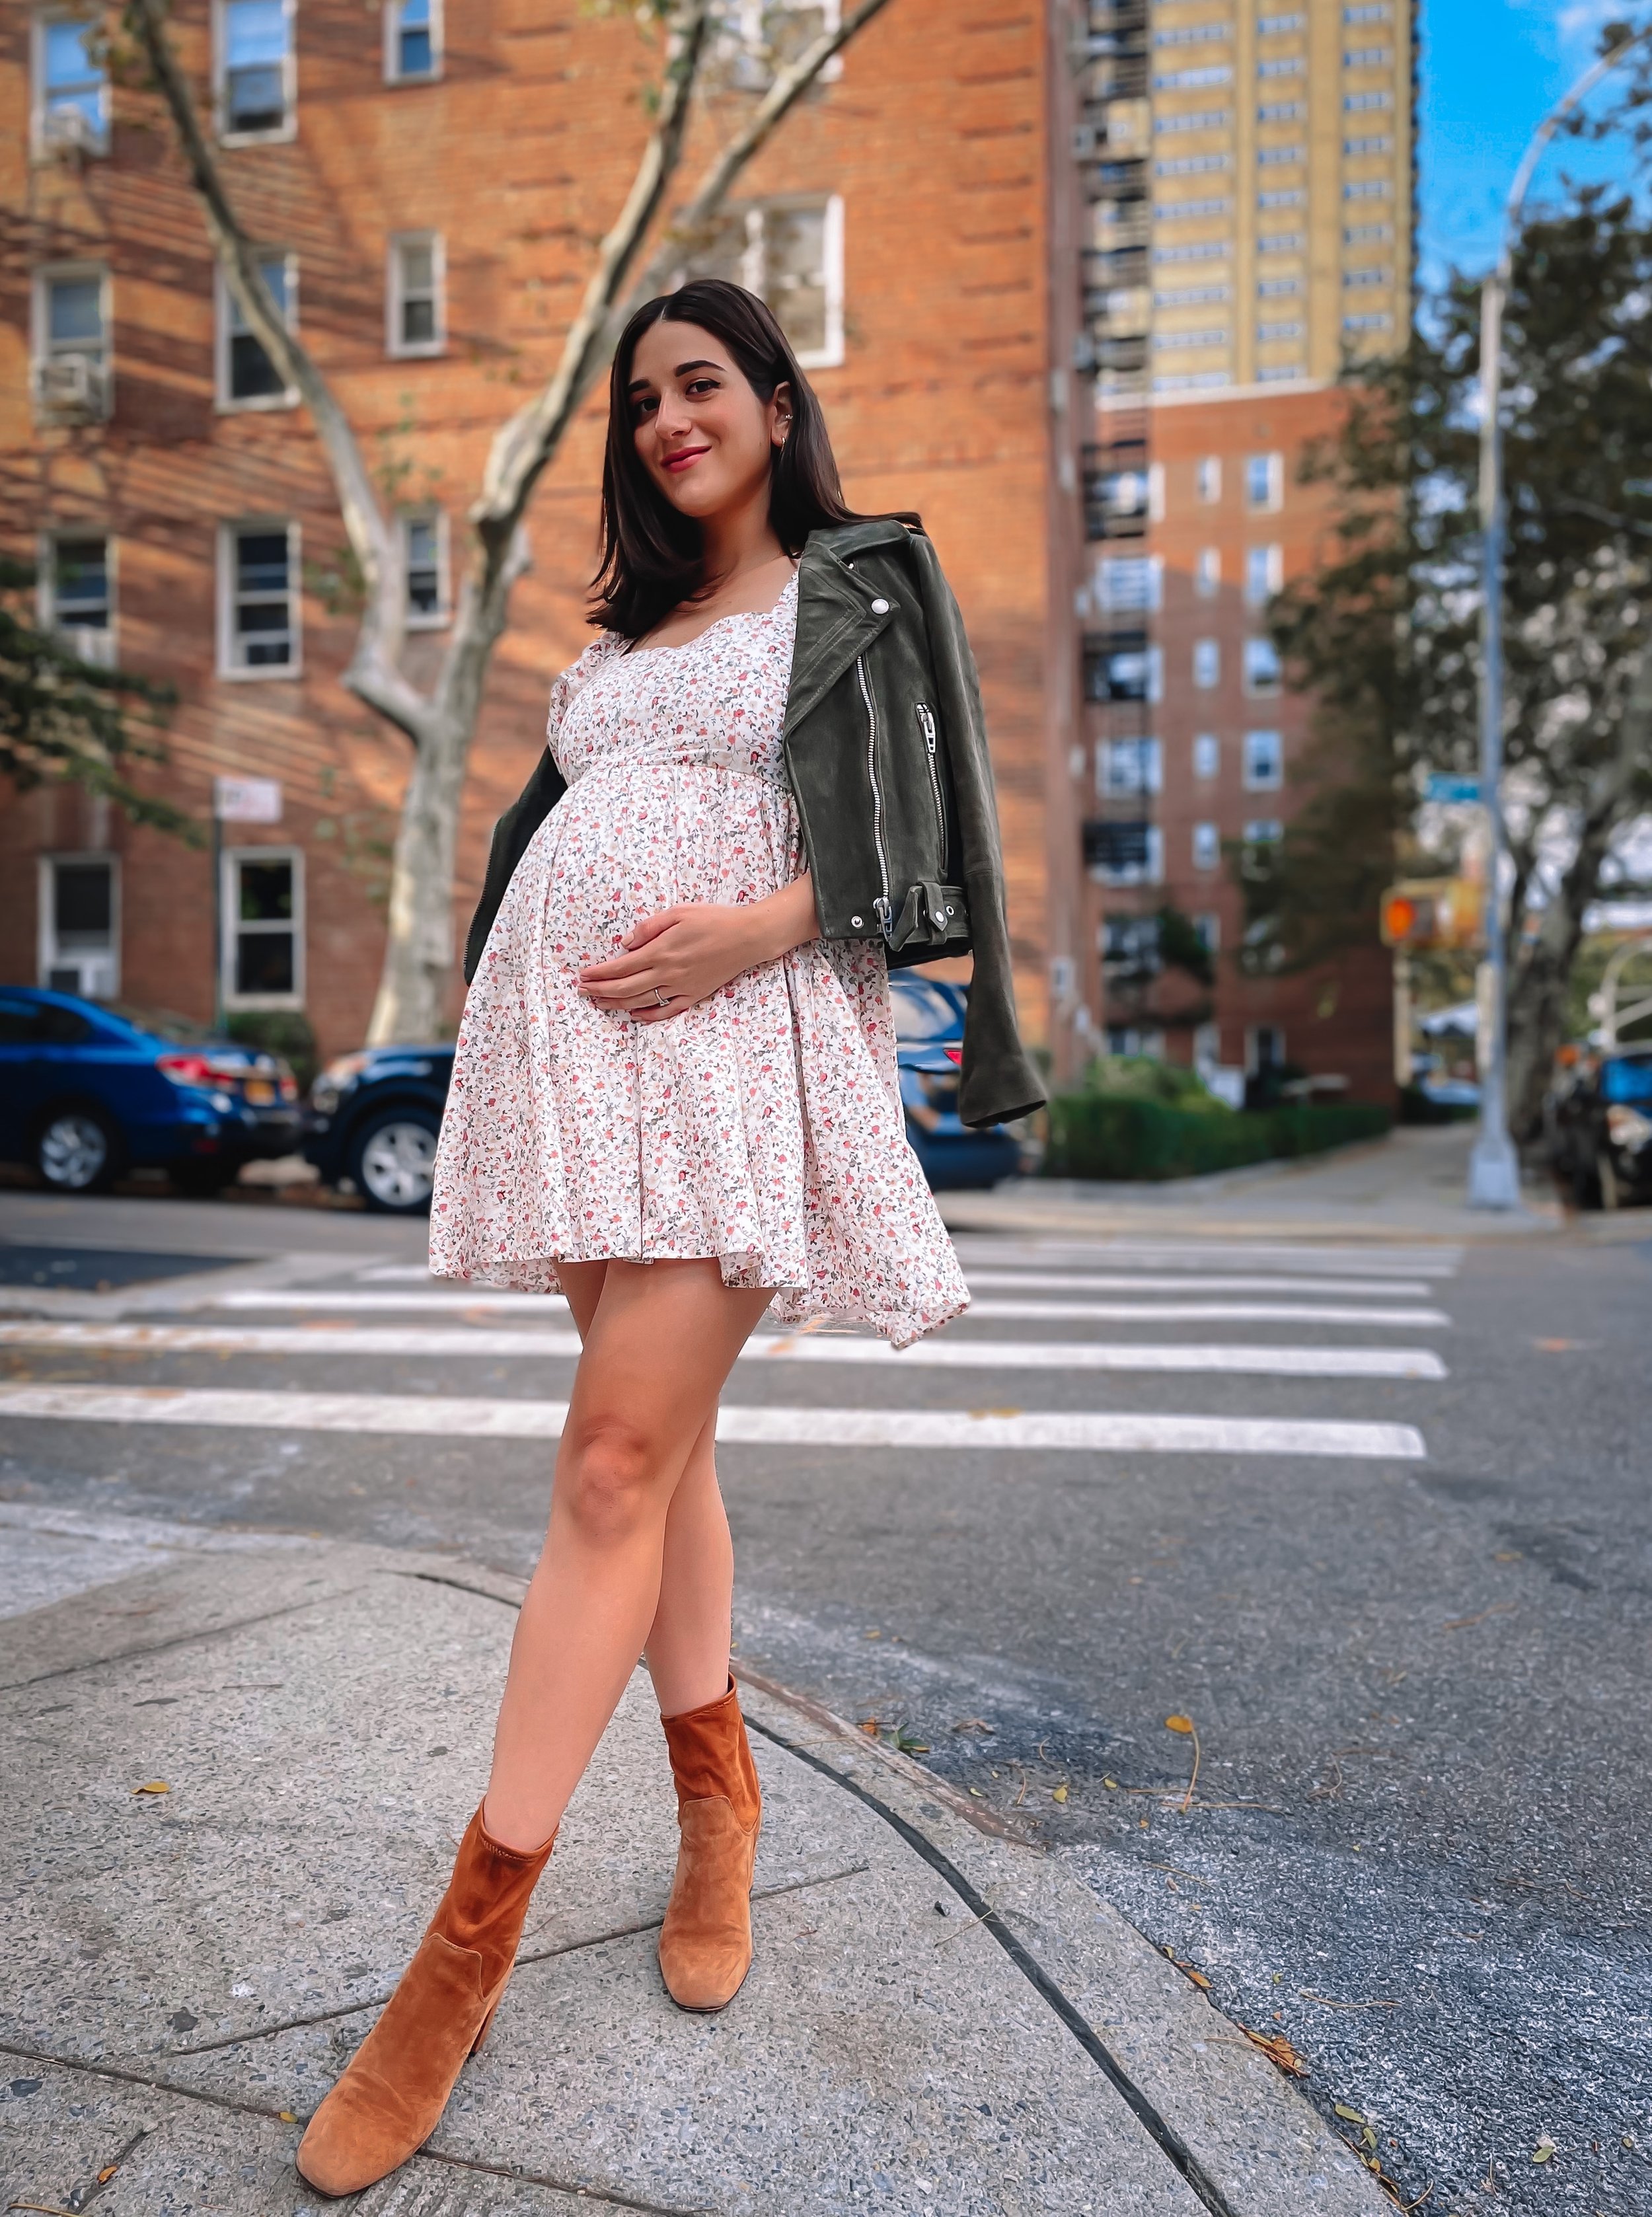 Floral Dress Tan Booties Esther Santer NYC Street Style Bump Friendly Fashion Maternity Look OOTD Olive Green Moto Jacket What To Wear Fall Pregnancy Baby Get Dressed Bumpdate IVF Success Feminine Women New York City Tripod Photoshoot Shoes Boots Girl.JPG